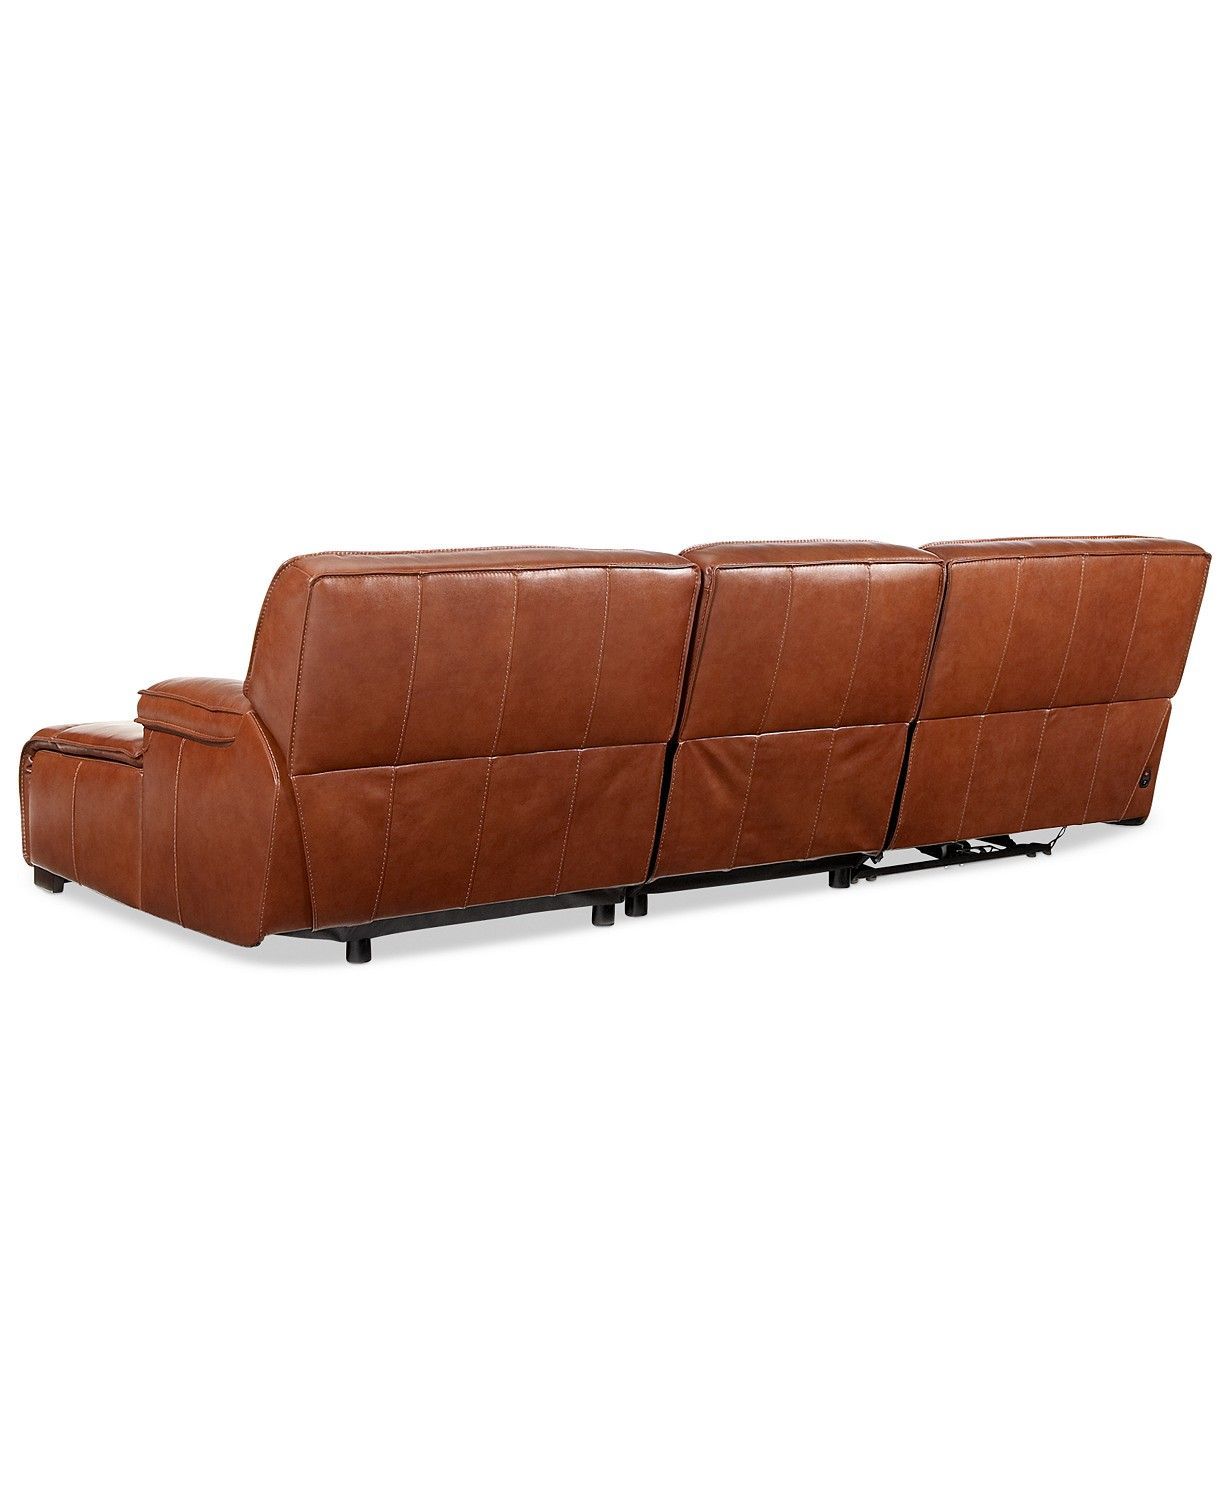 Furniture Beckett 3 Pc Leather Sectional Sofa With Chaise With 3Pc Miles Leather Sectional Sofas With Chaise (View 8 of 15)